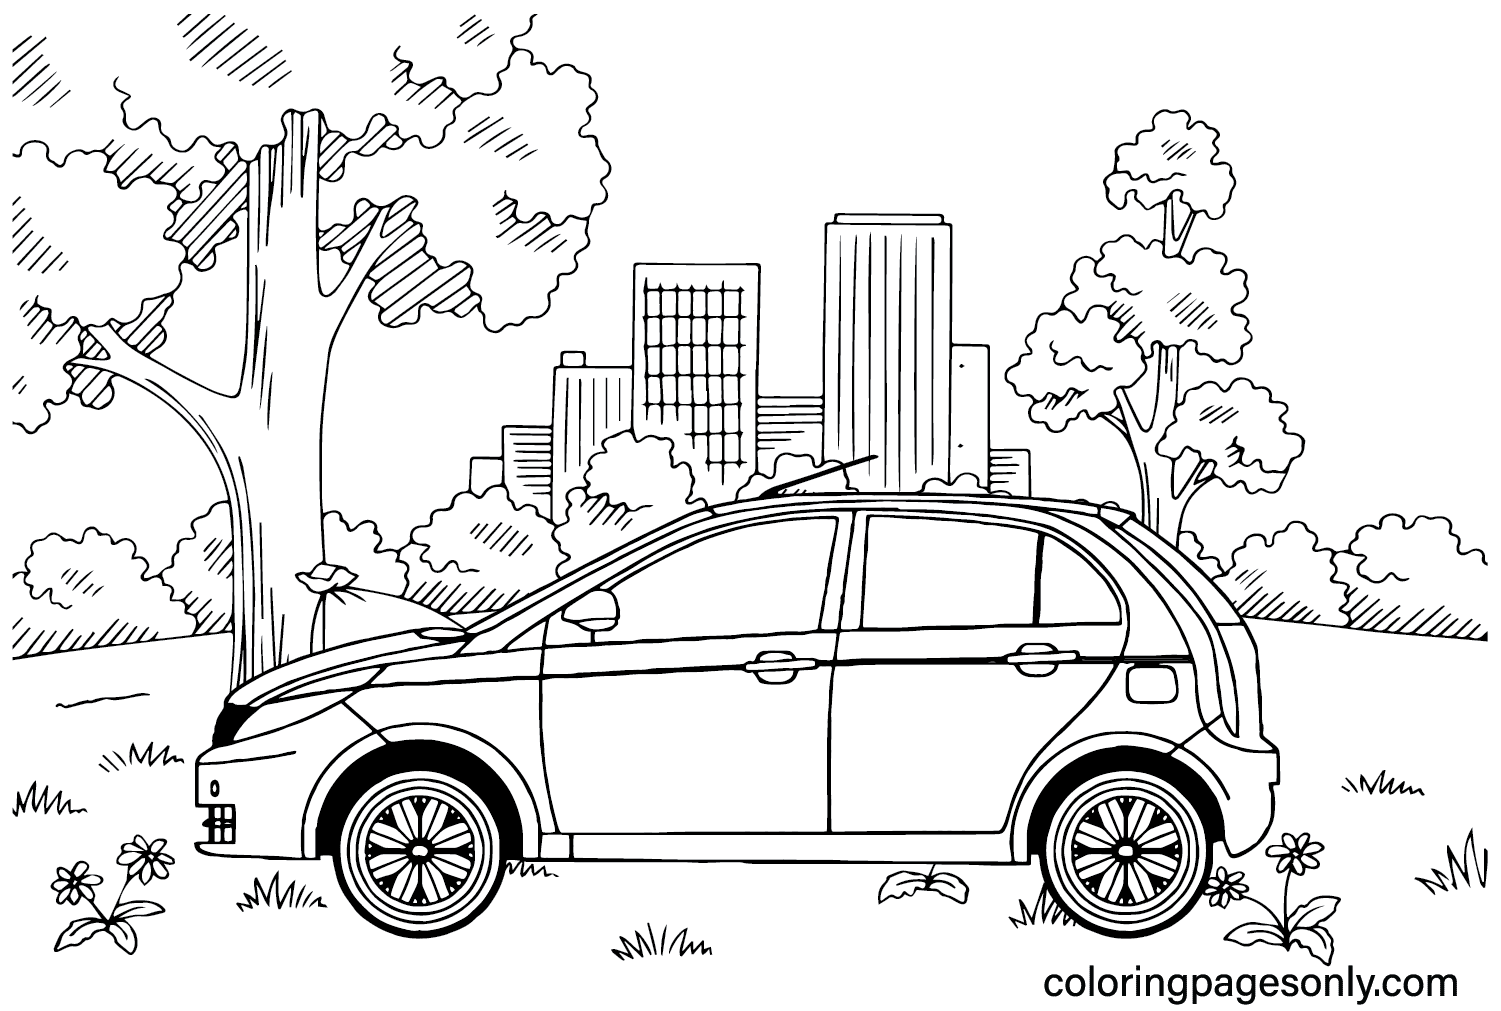 Tata Indica Vista 90 Hatchback Coloring Page from Tata